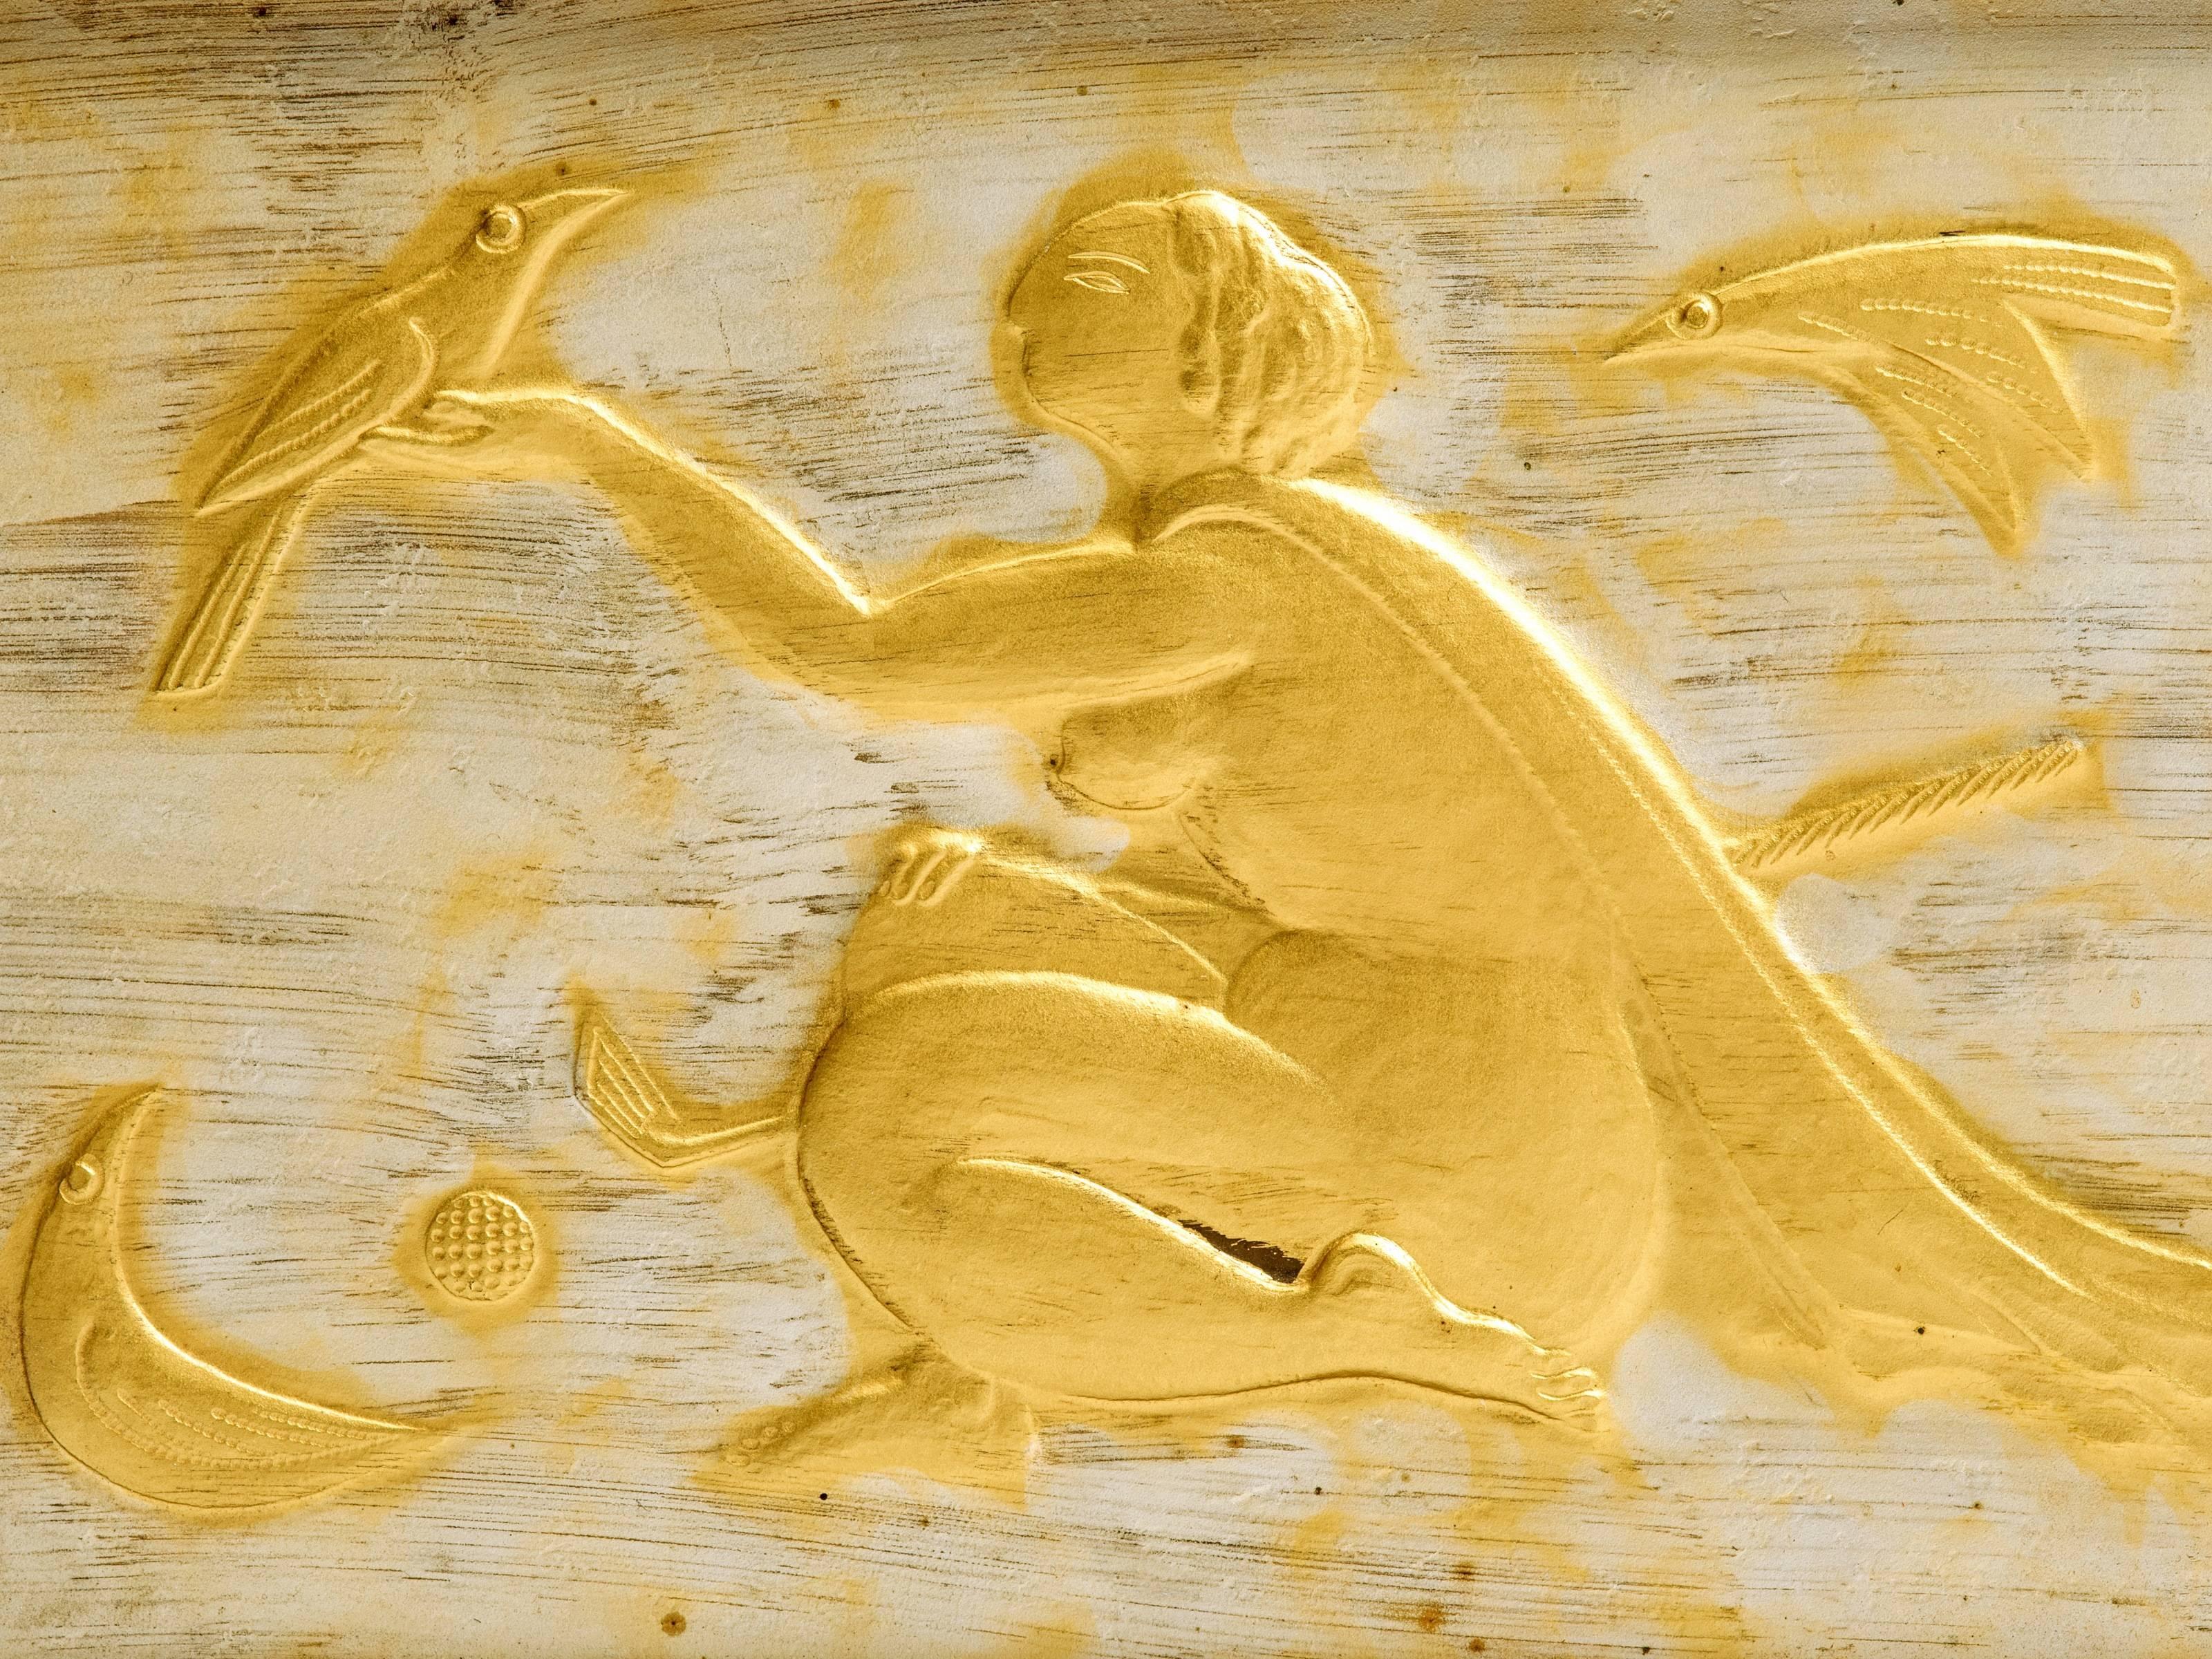 Stunning giltwood hand-carved figural of a nude woman reaching out to birds holding a golf club. Truly one of the most spectacular pieces of golf art in silver and gold gilt. Period mahogany frame with green silk matte, artist signature and Miyamoto